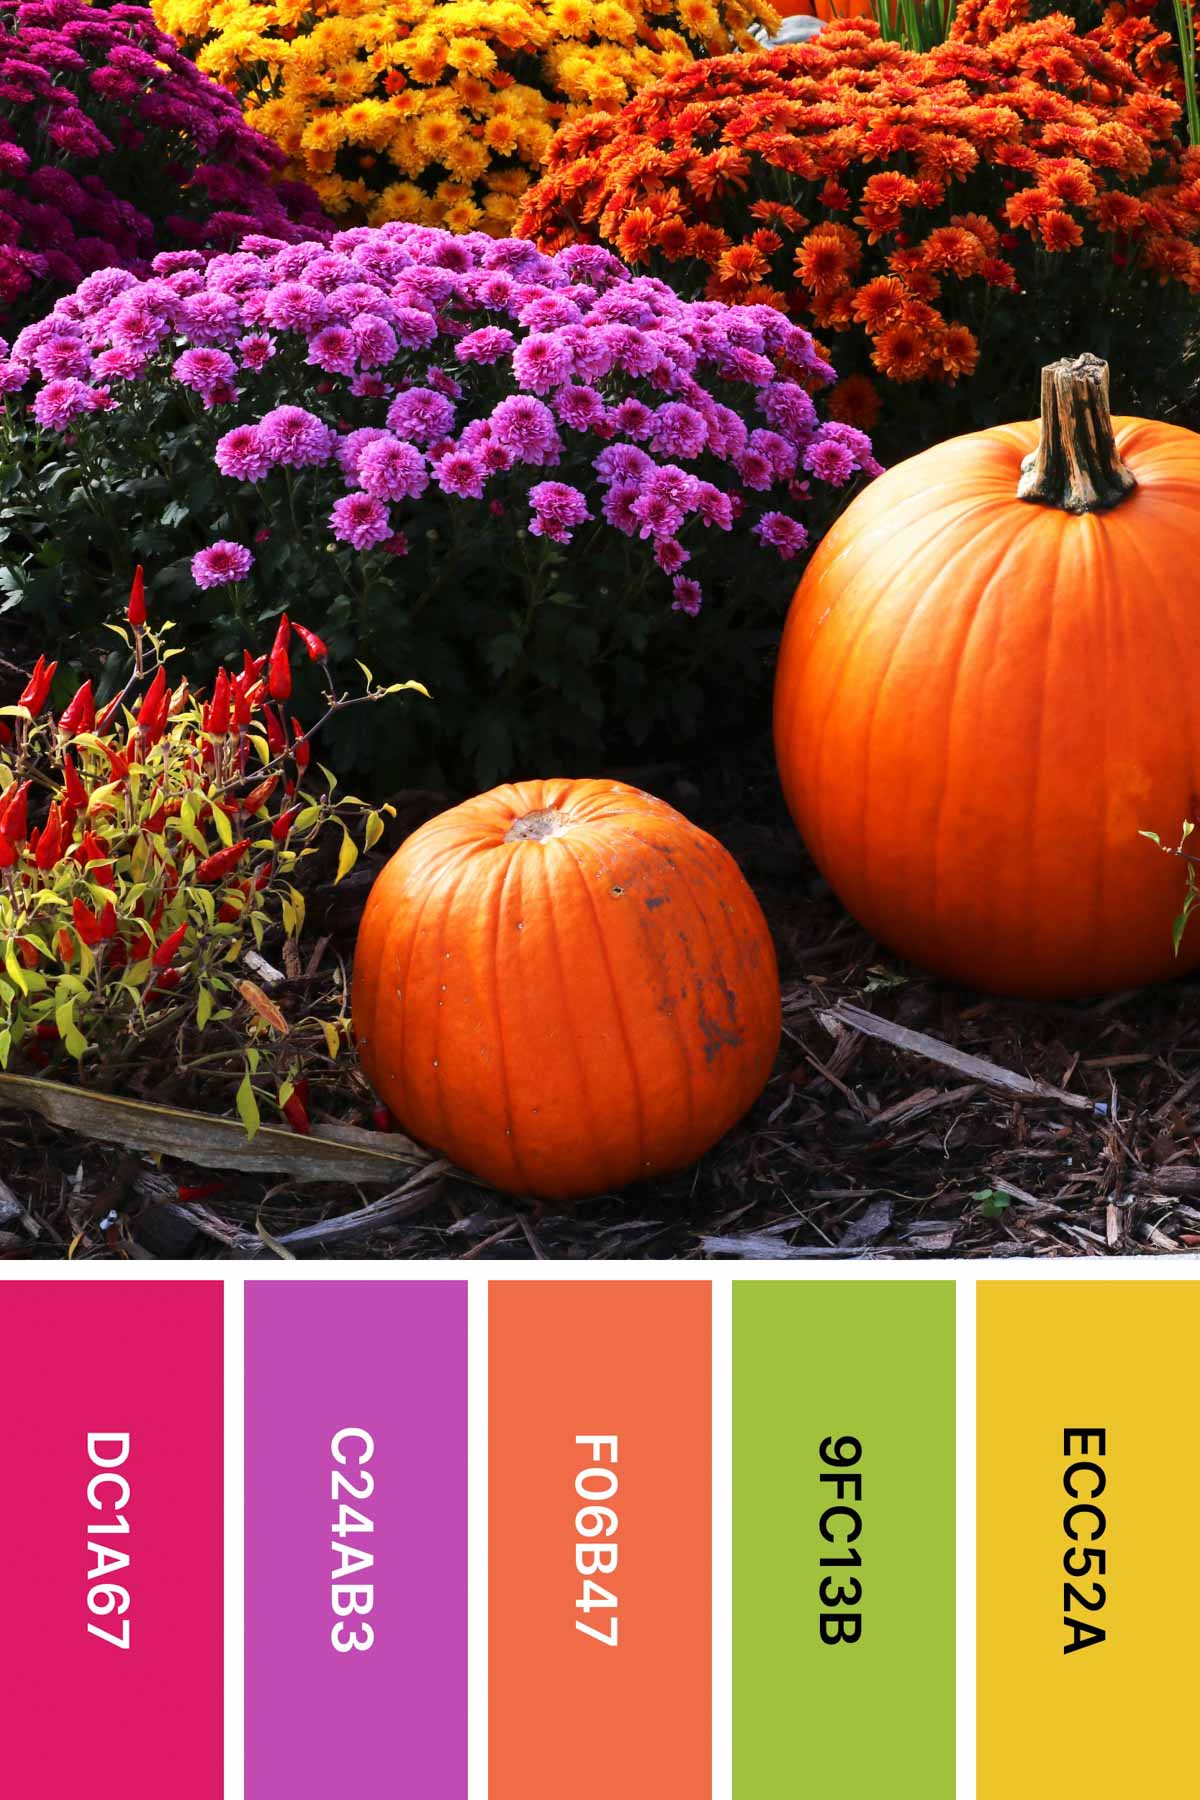 pumpkins and mums and a bright fall color palette